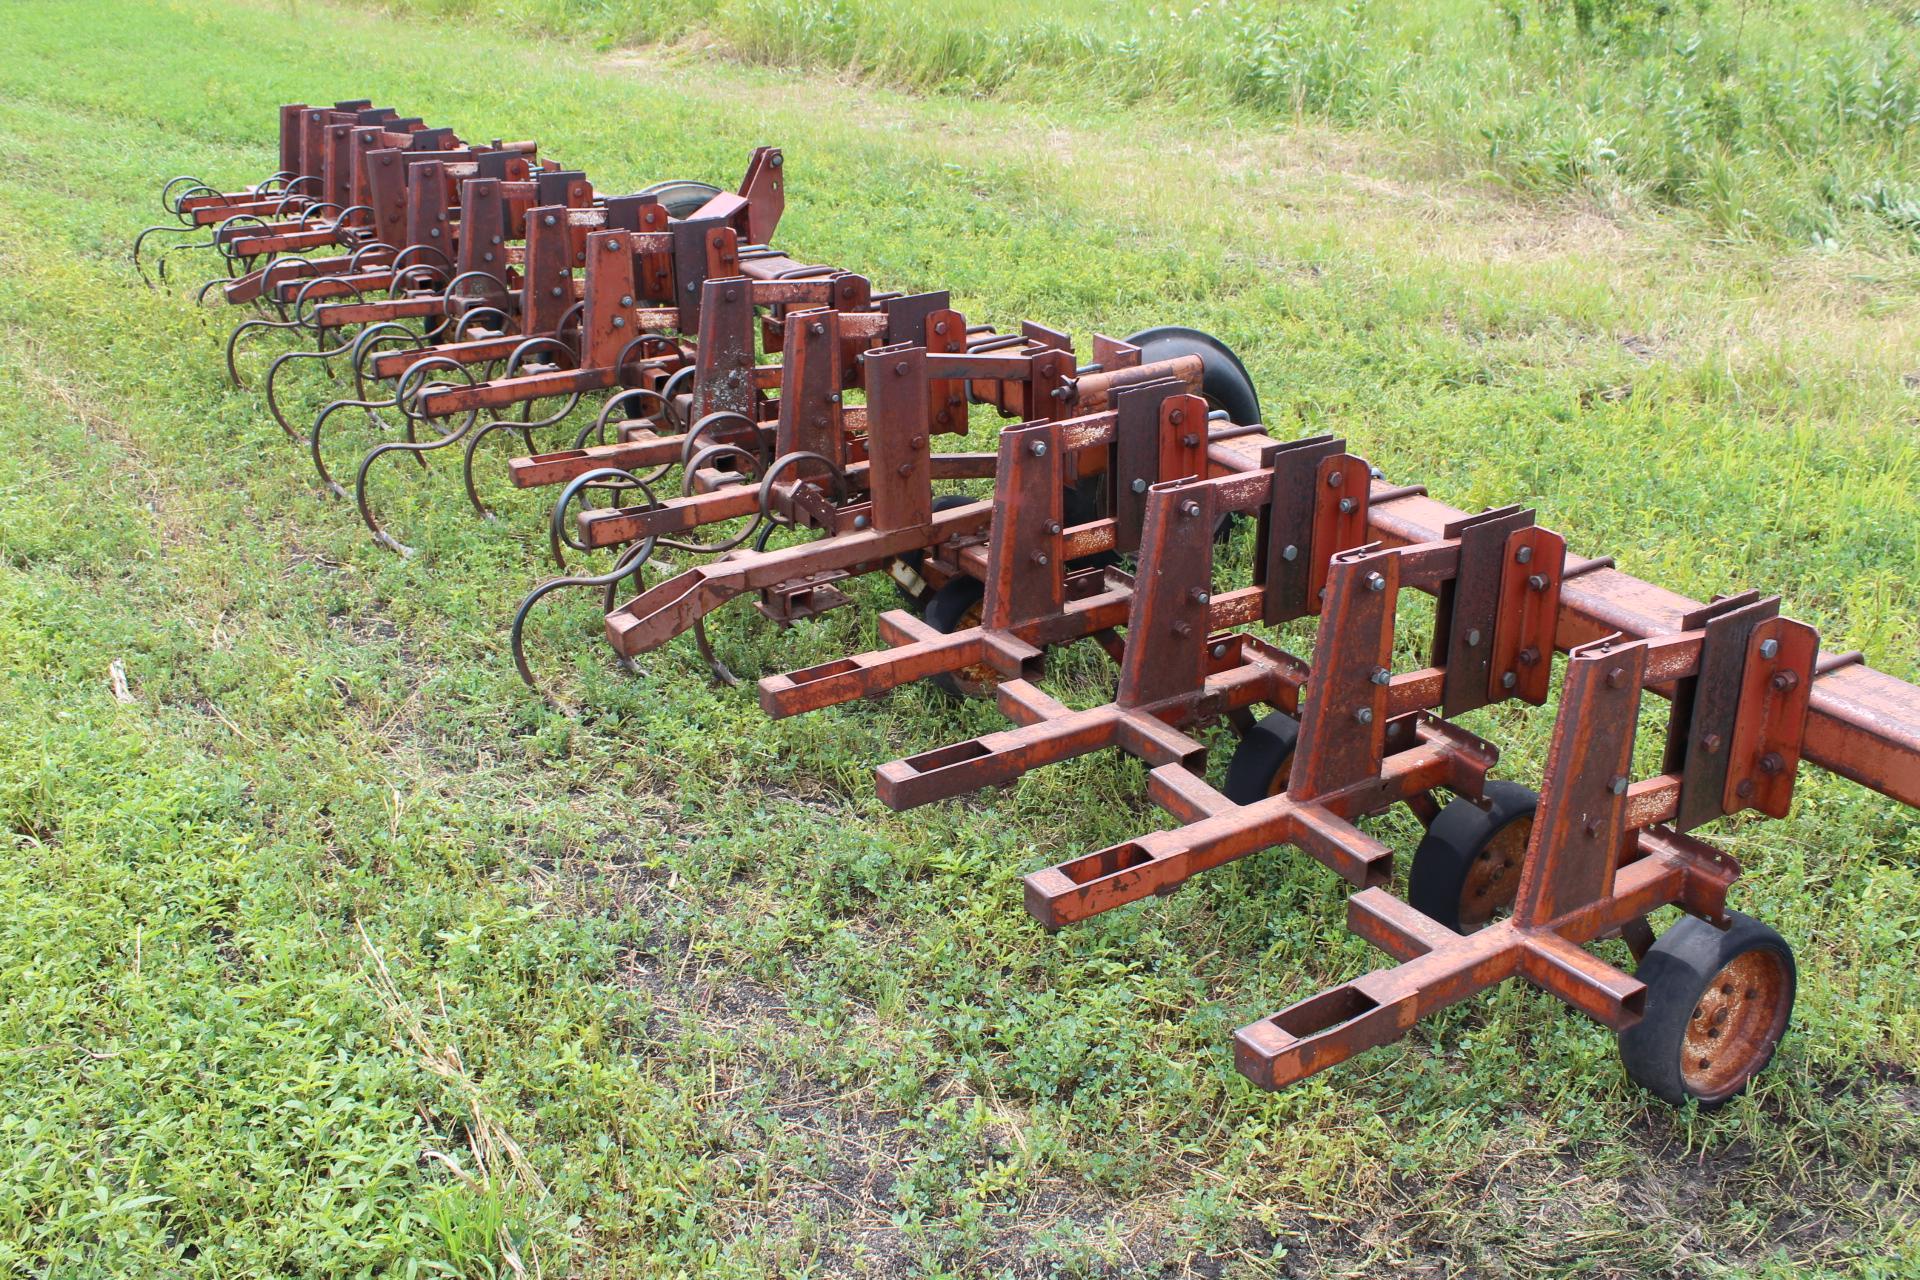 Mounted Cultivator, 15R15”